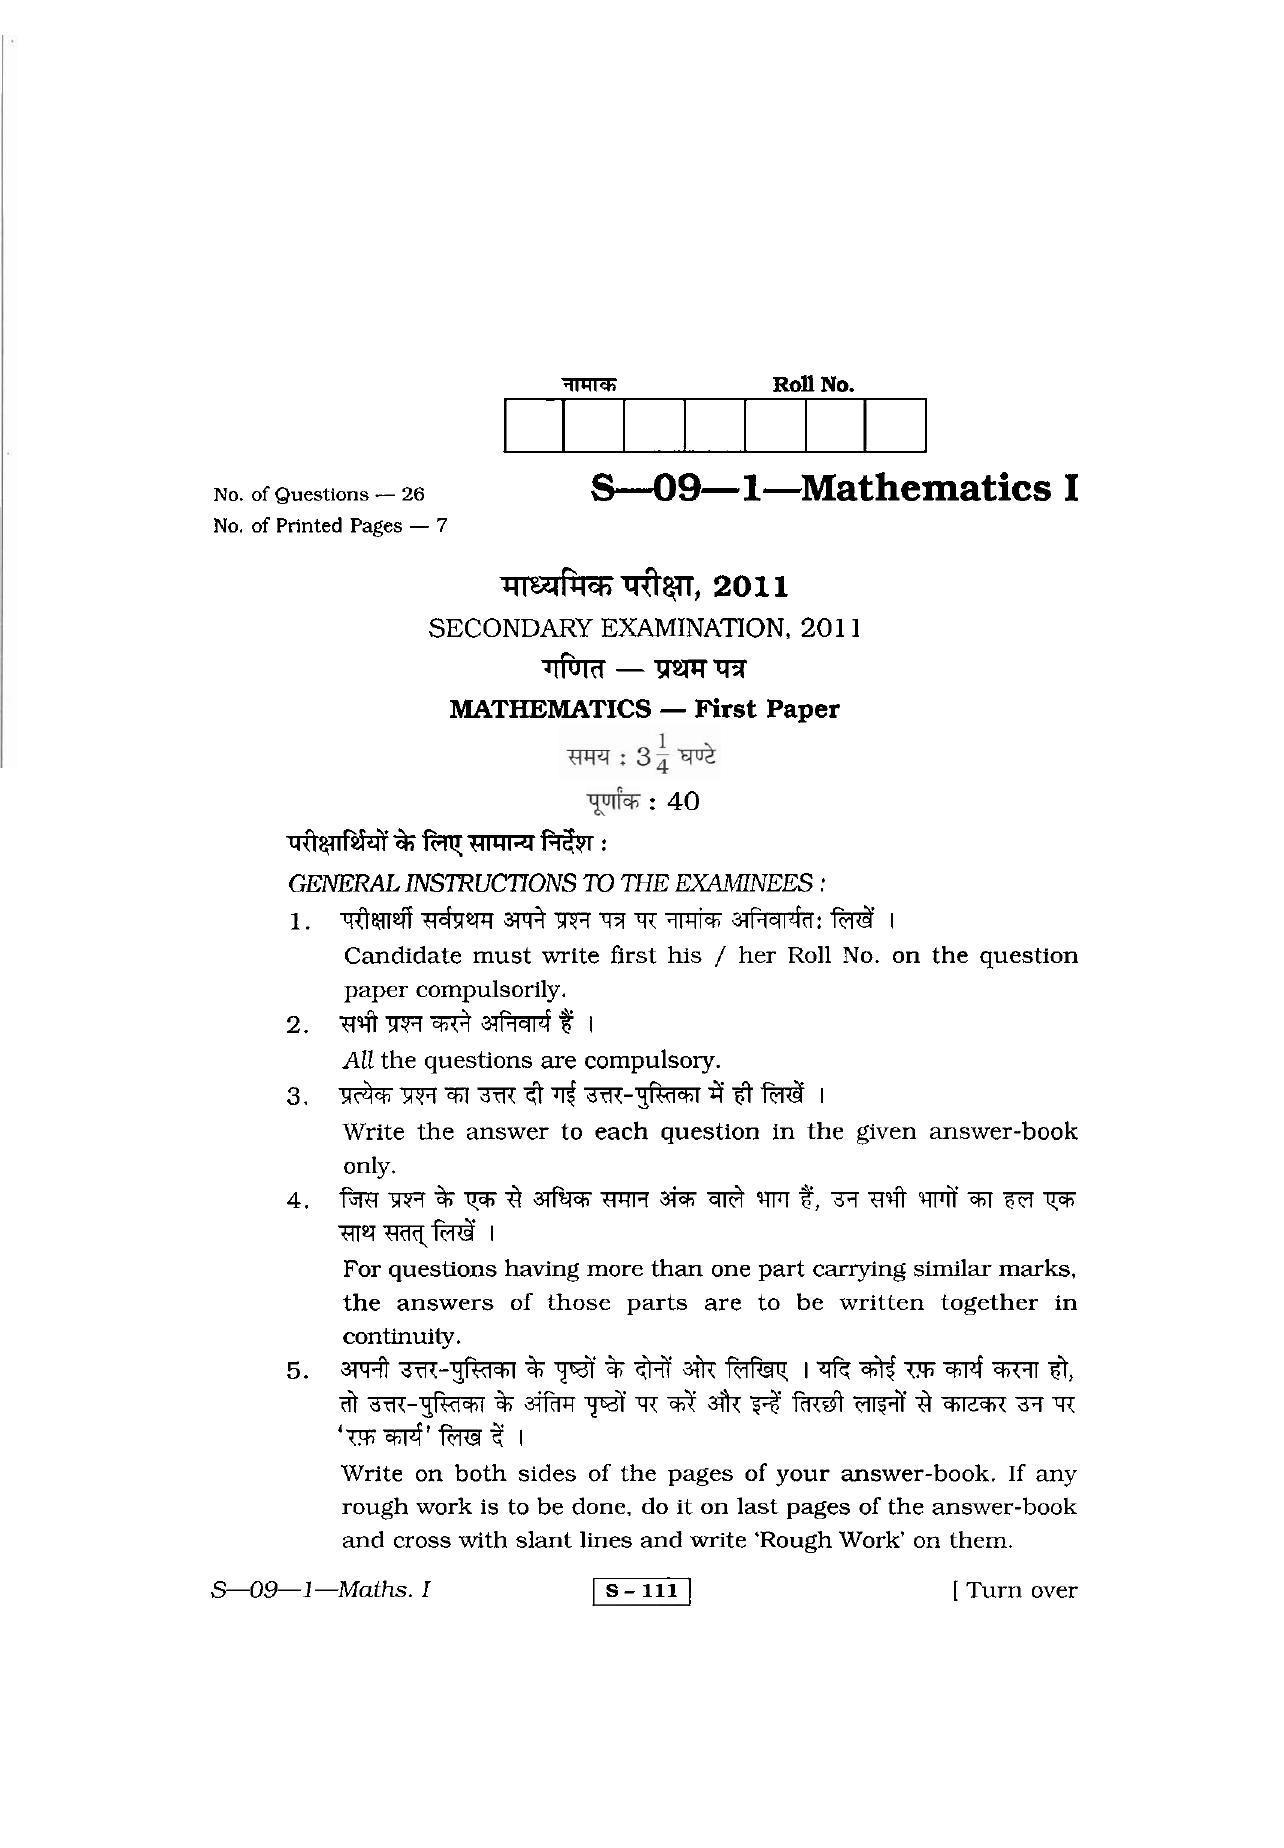 RBSE Class 10 Mathematics  – I 2011 Question Paper - Page 1